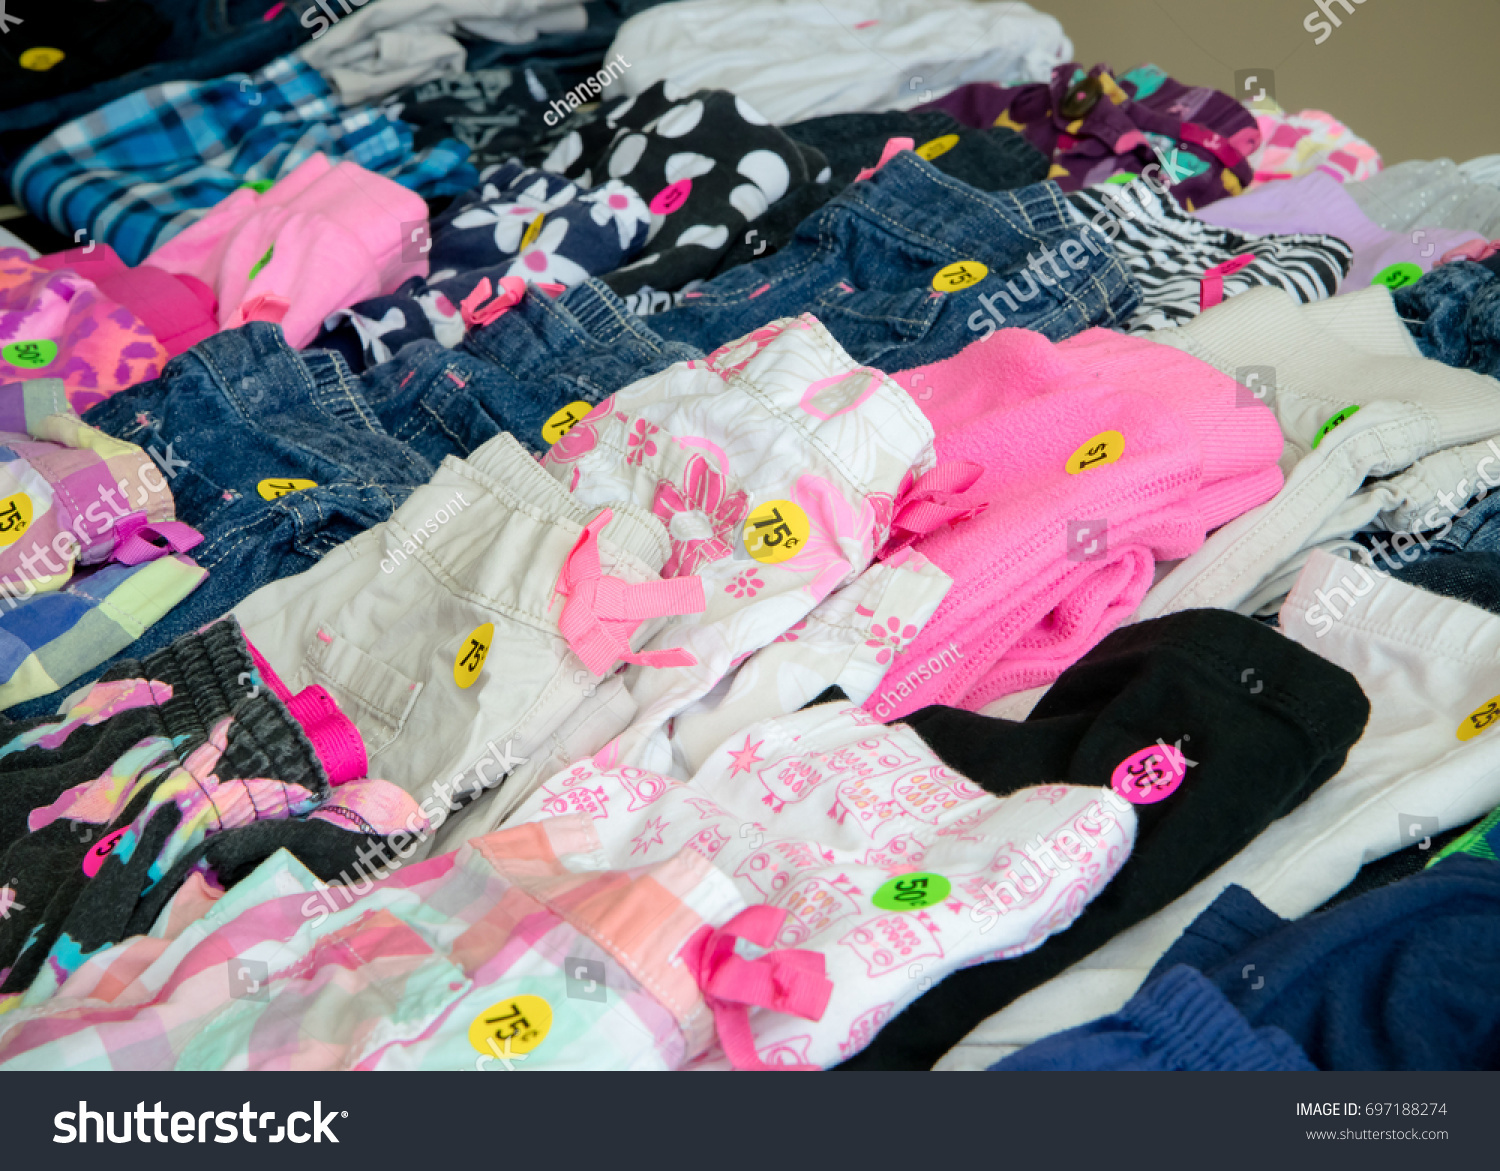 Colorful kids' clothing with price tags arranged on a garage sale table #697188274